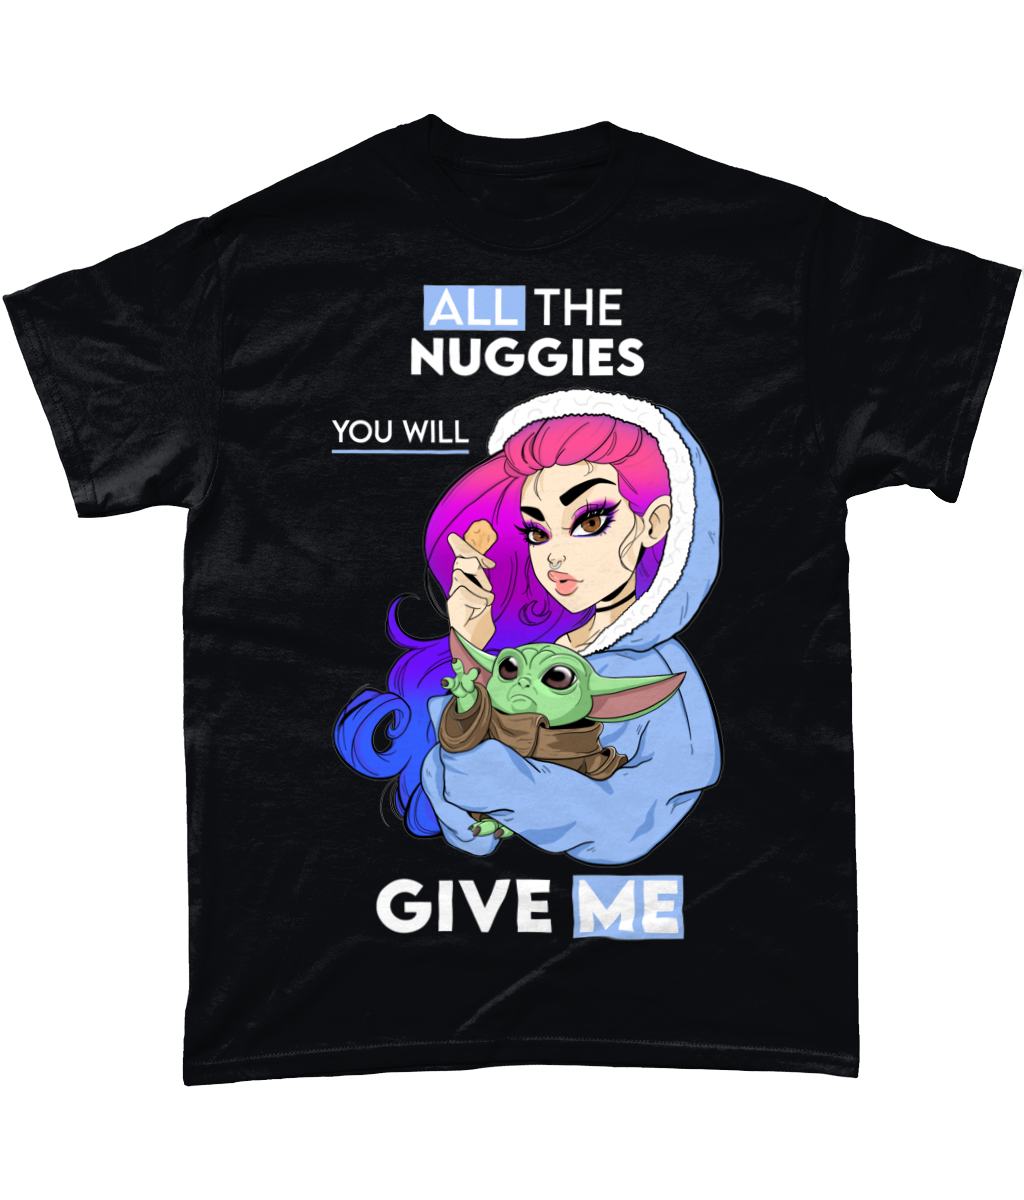 Pixie Cake Face 'All The Nuggies' T-Shirt